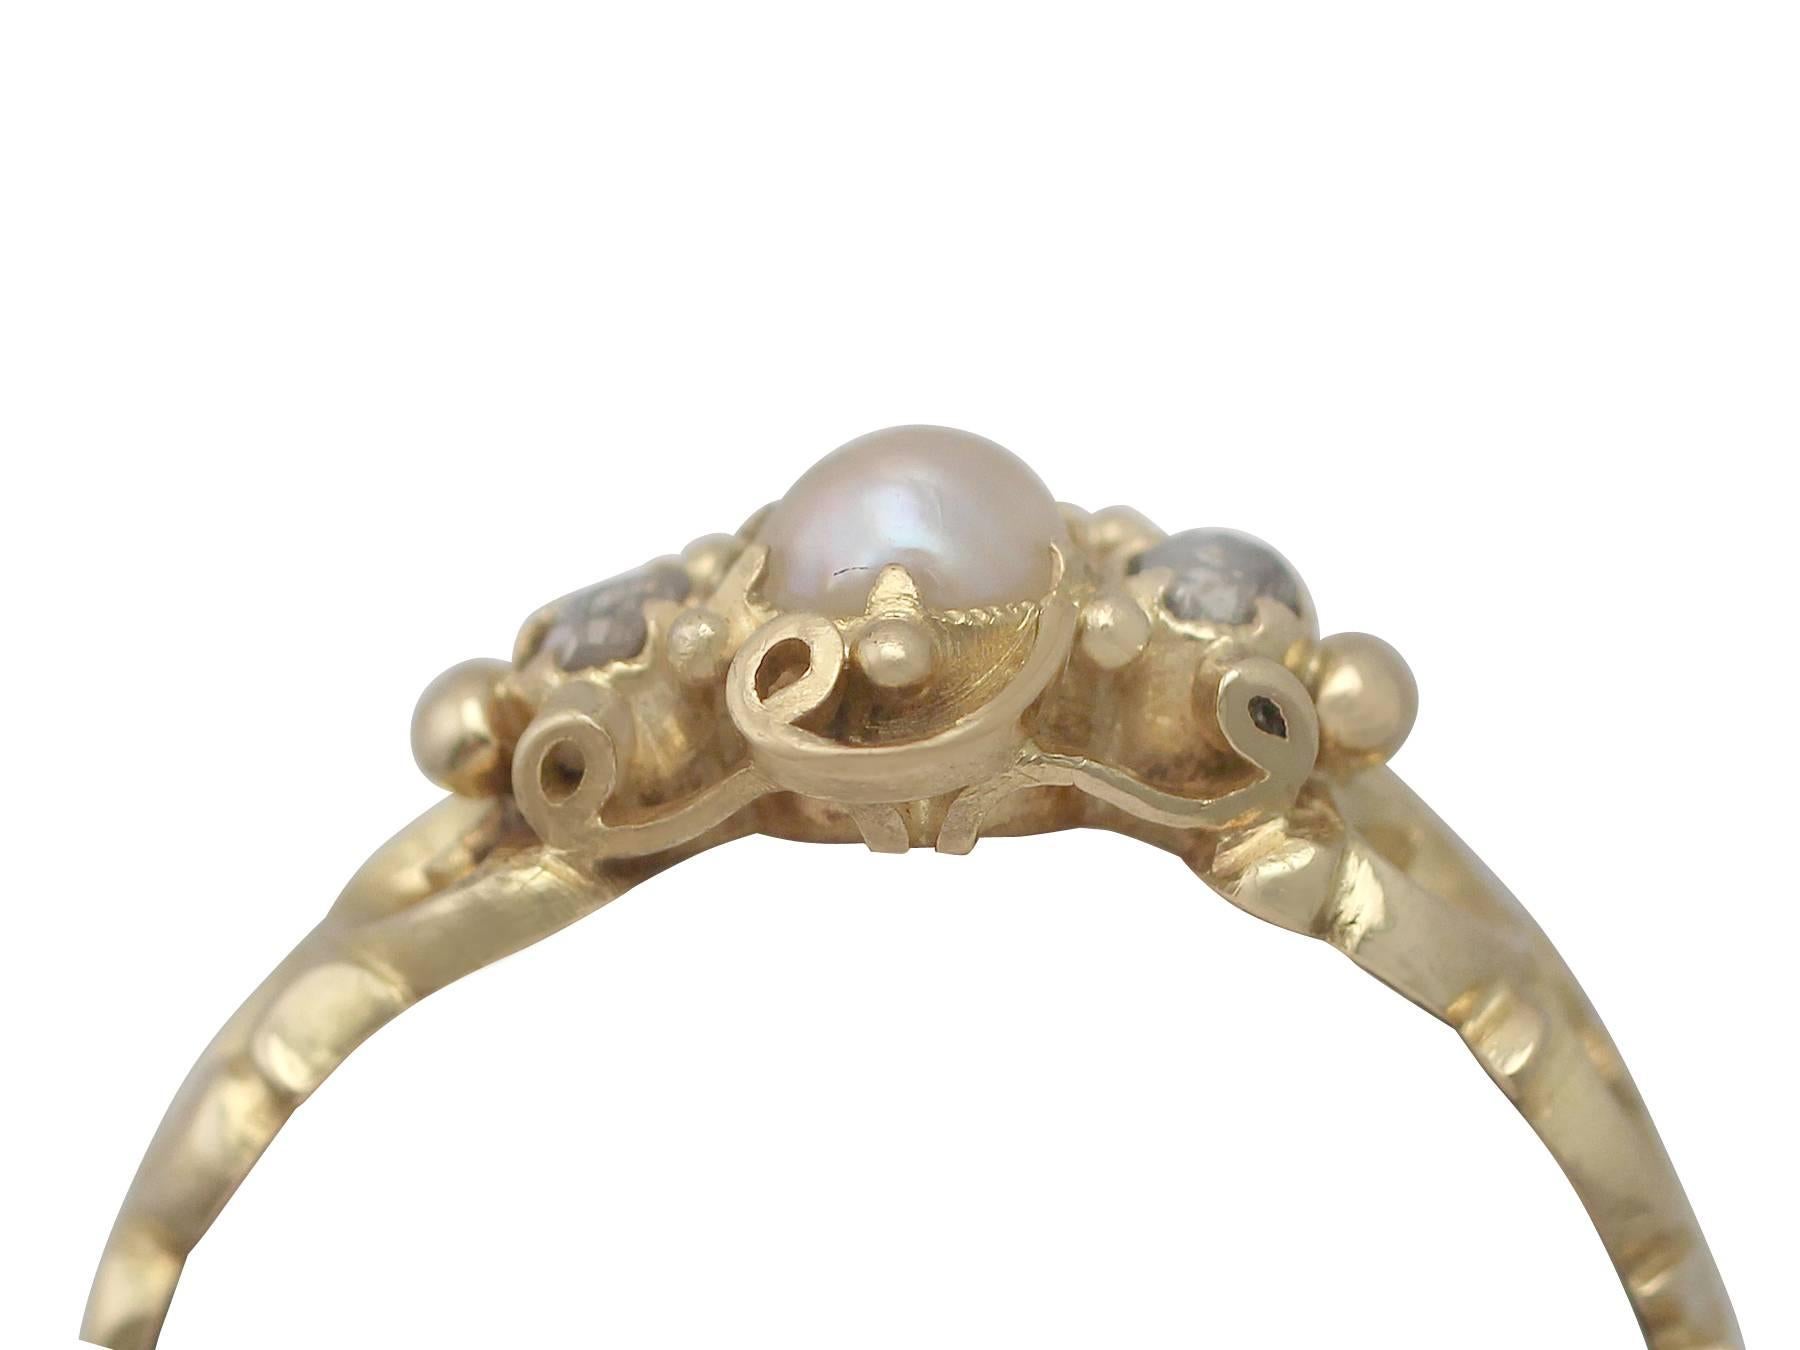 This fine and impressive pearl and diamond ring haws been crafted in 18k yellow gold.

The pierced decorated, organic scrolling leaf design mount is ornamented with a feature 4mm natural pearl (strong probability) flanked on either side by a four